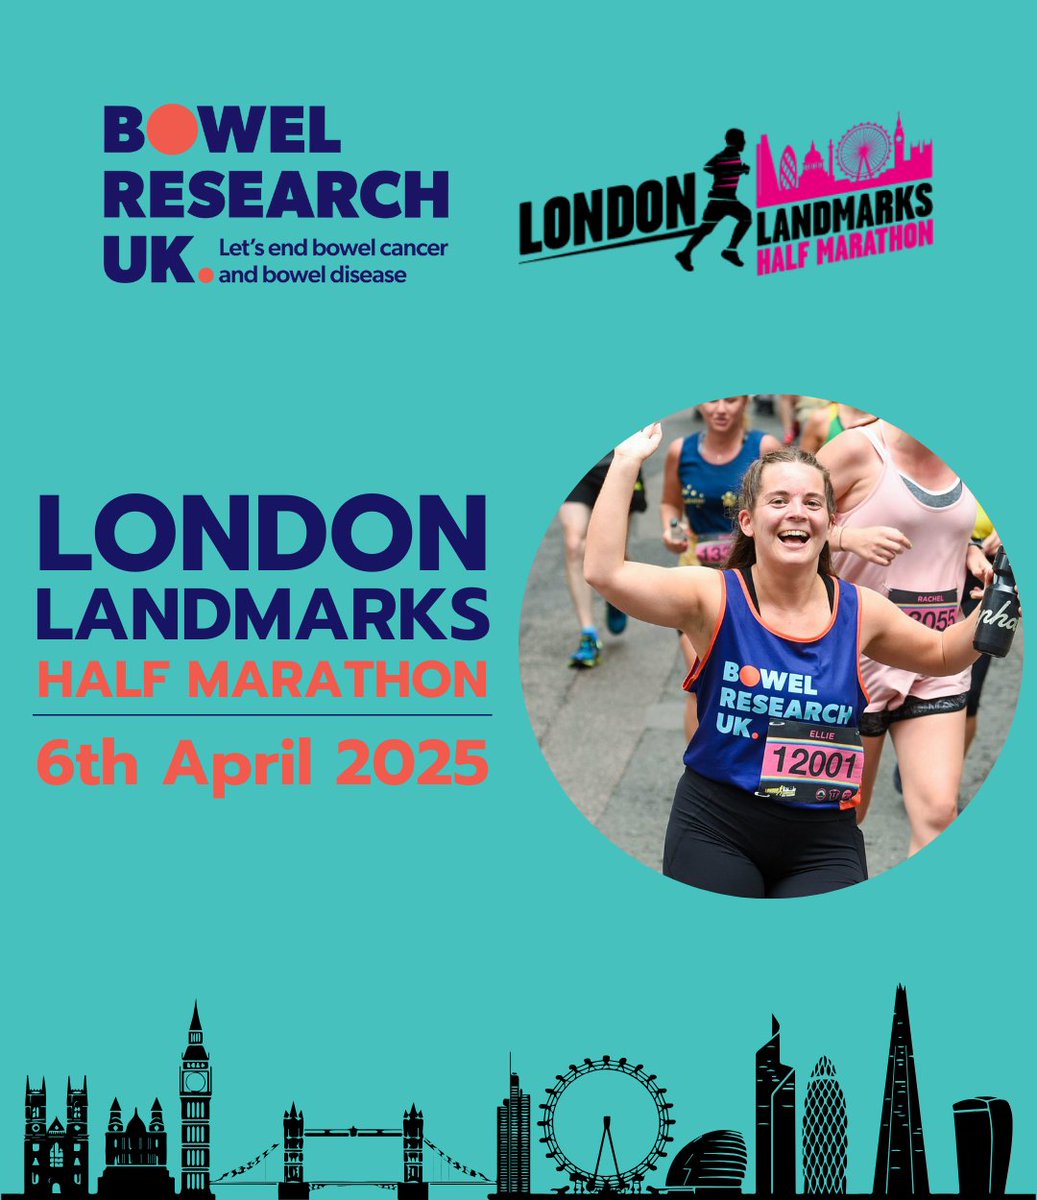 Are you still getting a buzz after the 2024 London Marathon? Perhaps it inspired you to get out there and start training! Why not take on the London Landmarks 2025 Half Marathon!? Join #TeamBRUK, apply today > bowelresearchuk.org/get-involved/e… #BowelResearch #LondonMarathon #Bowels